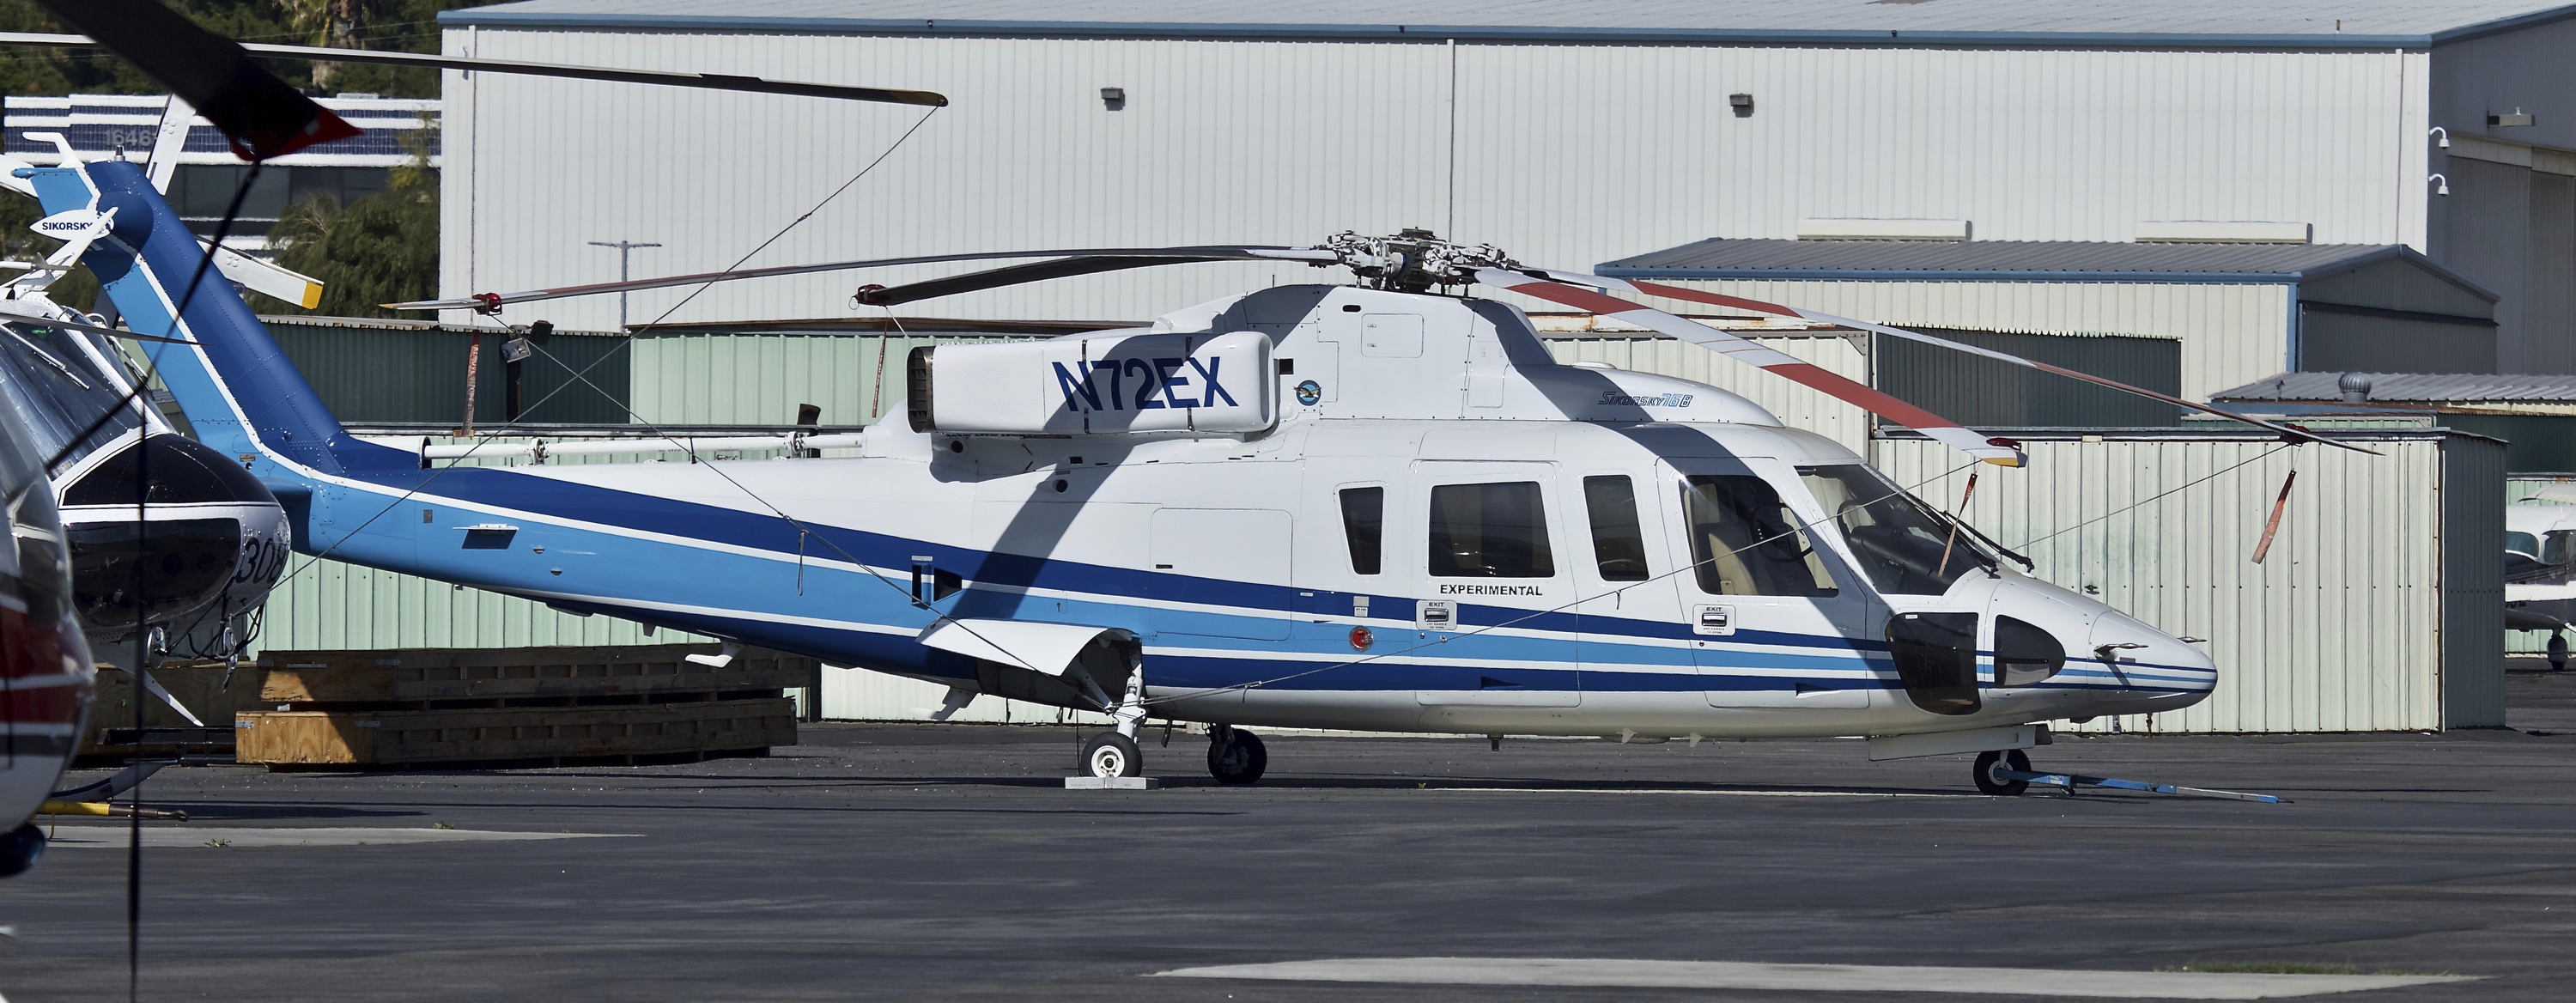 A Sikorsky S-76B helicopter similar to the one involved in the crash.